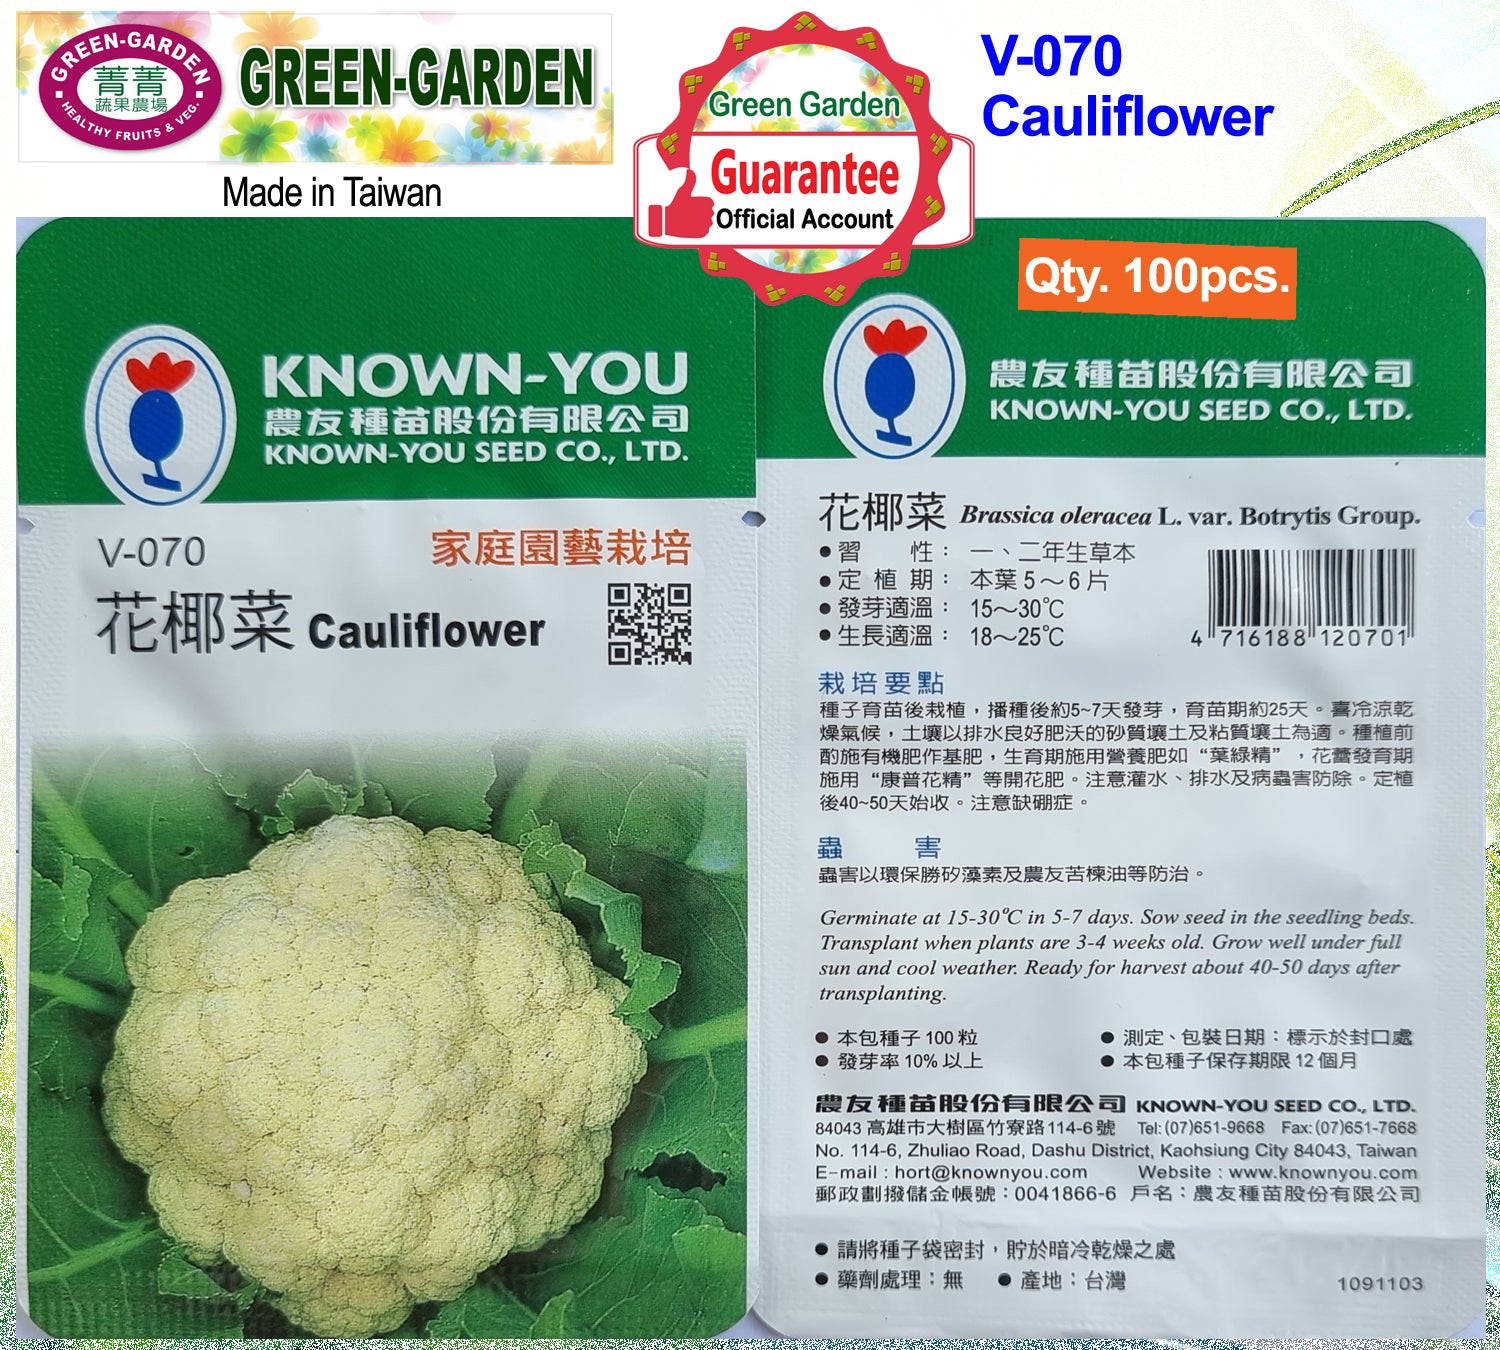 Known You Vegetable Seeds (V-070 Cauliflower)